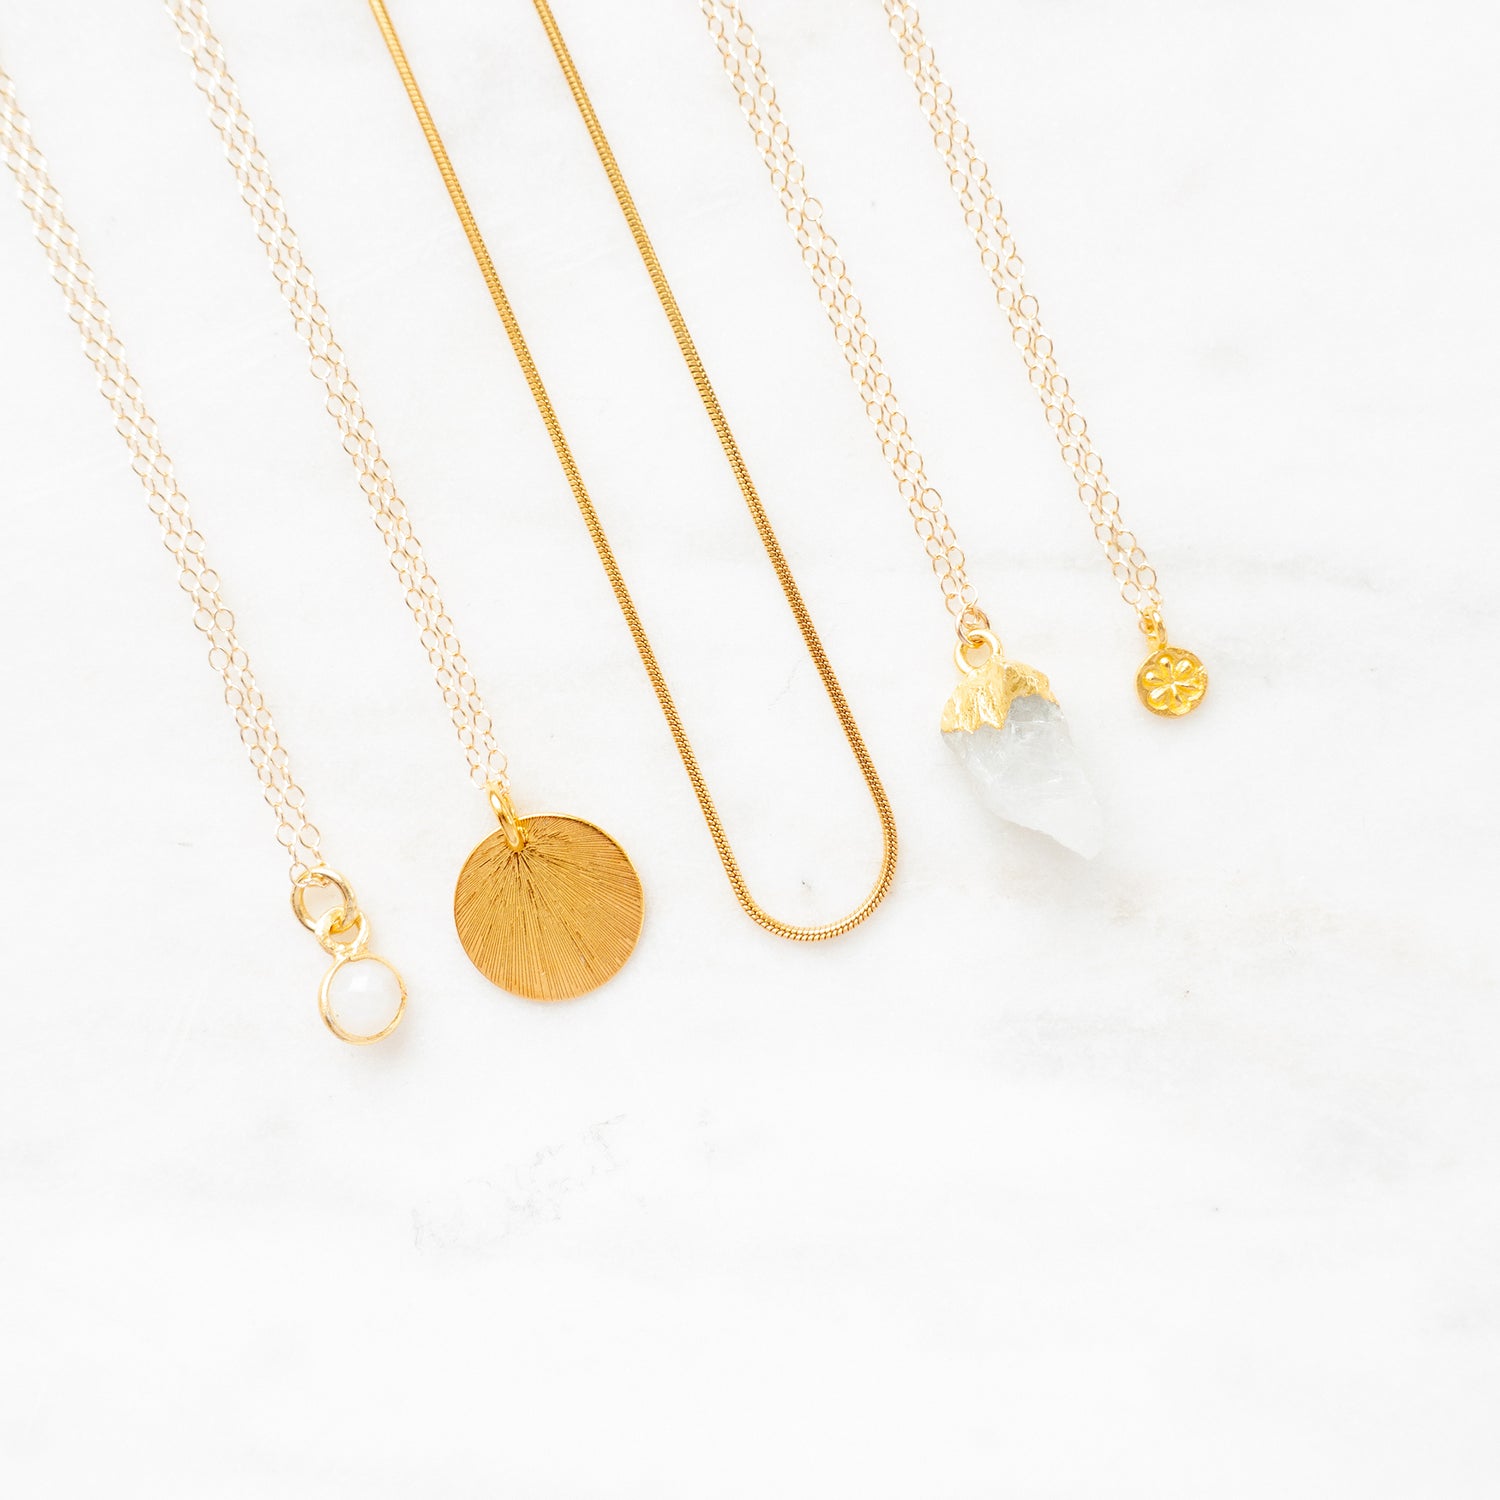 Sustainable Minimal Jewellery Capsule Collection